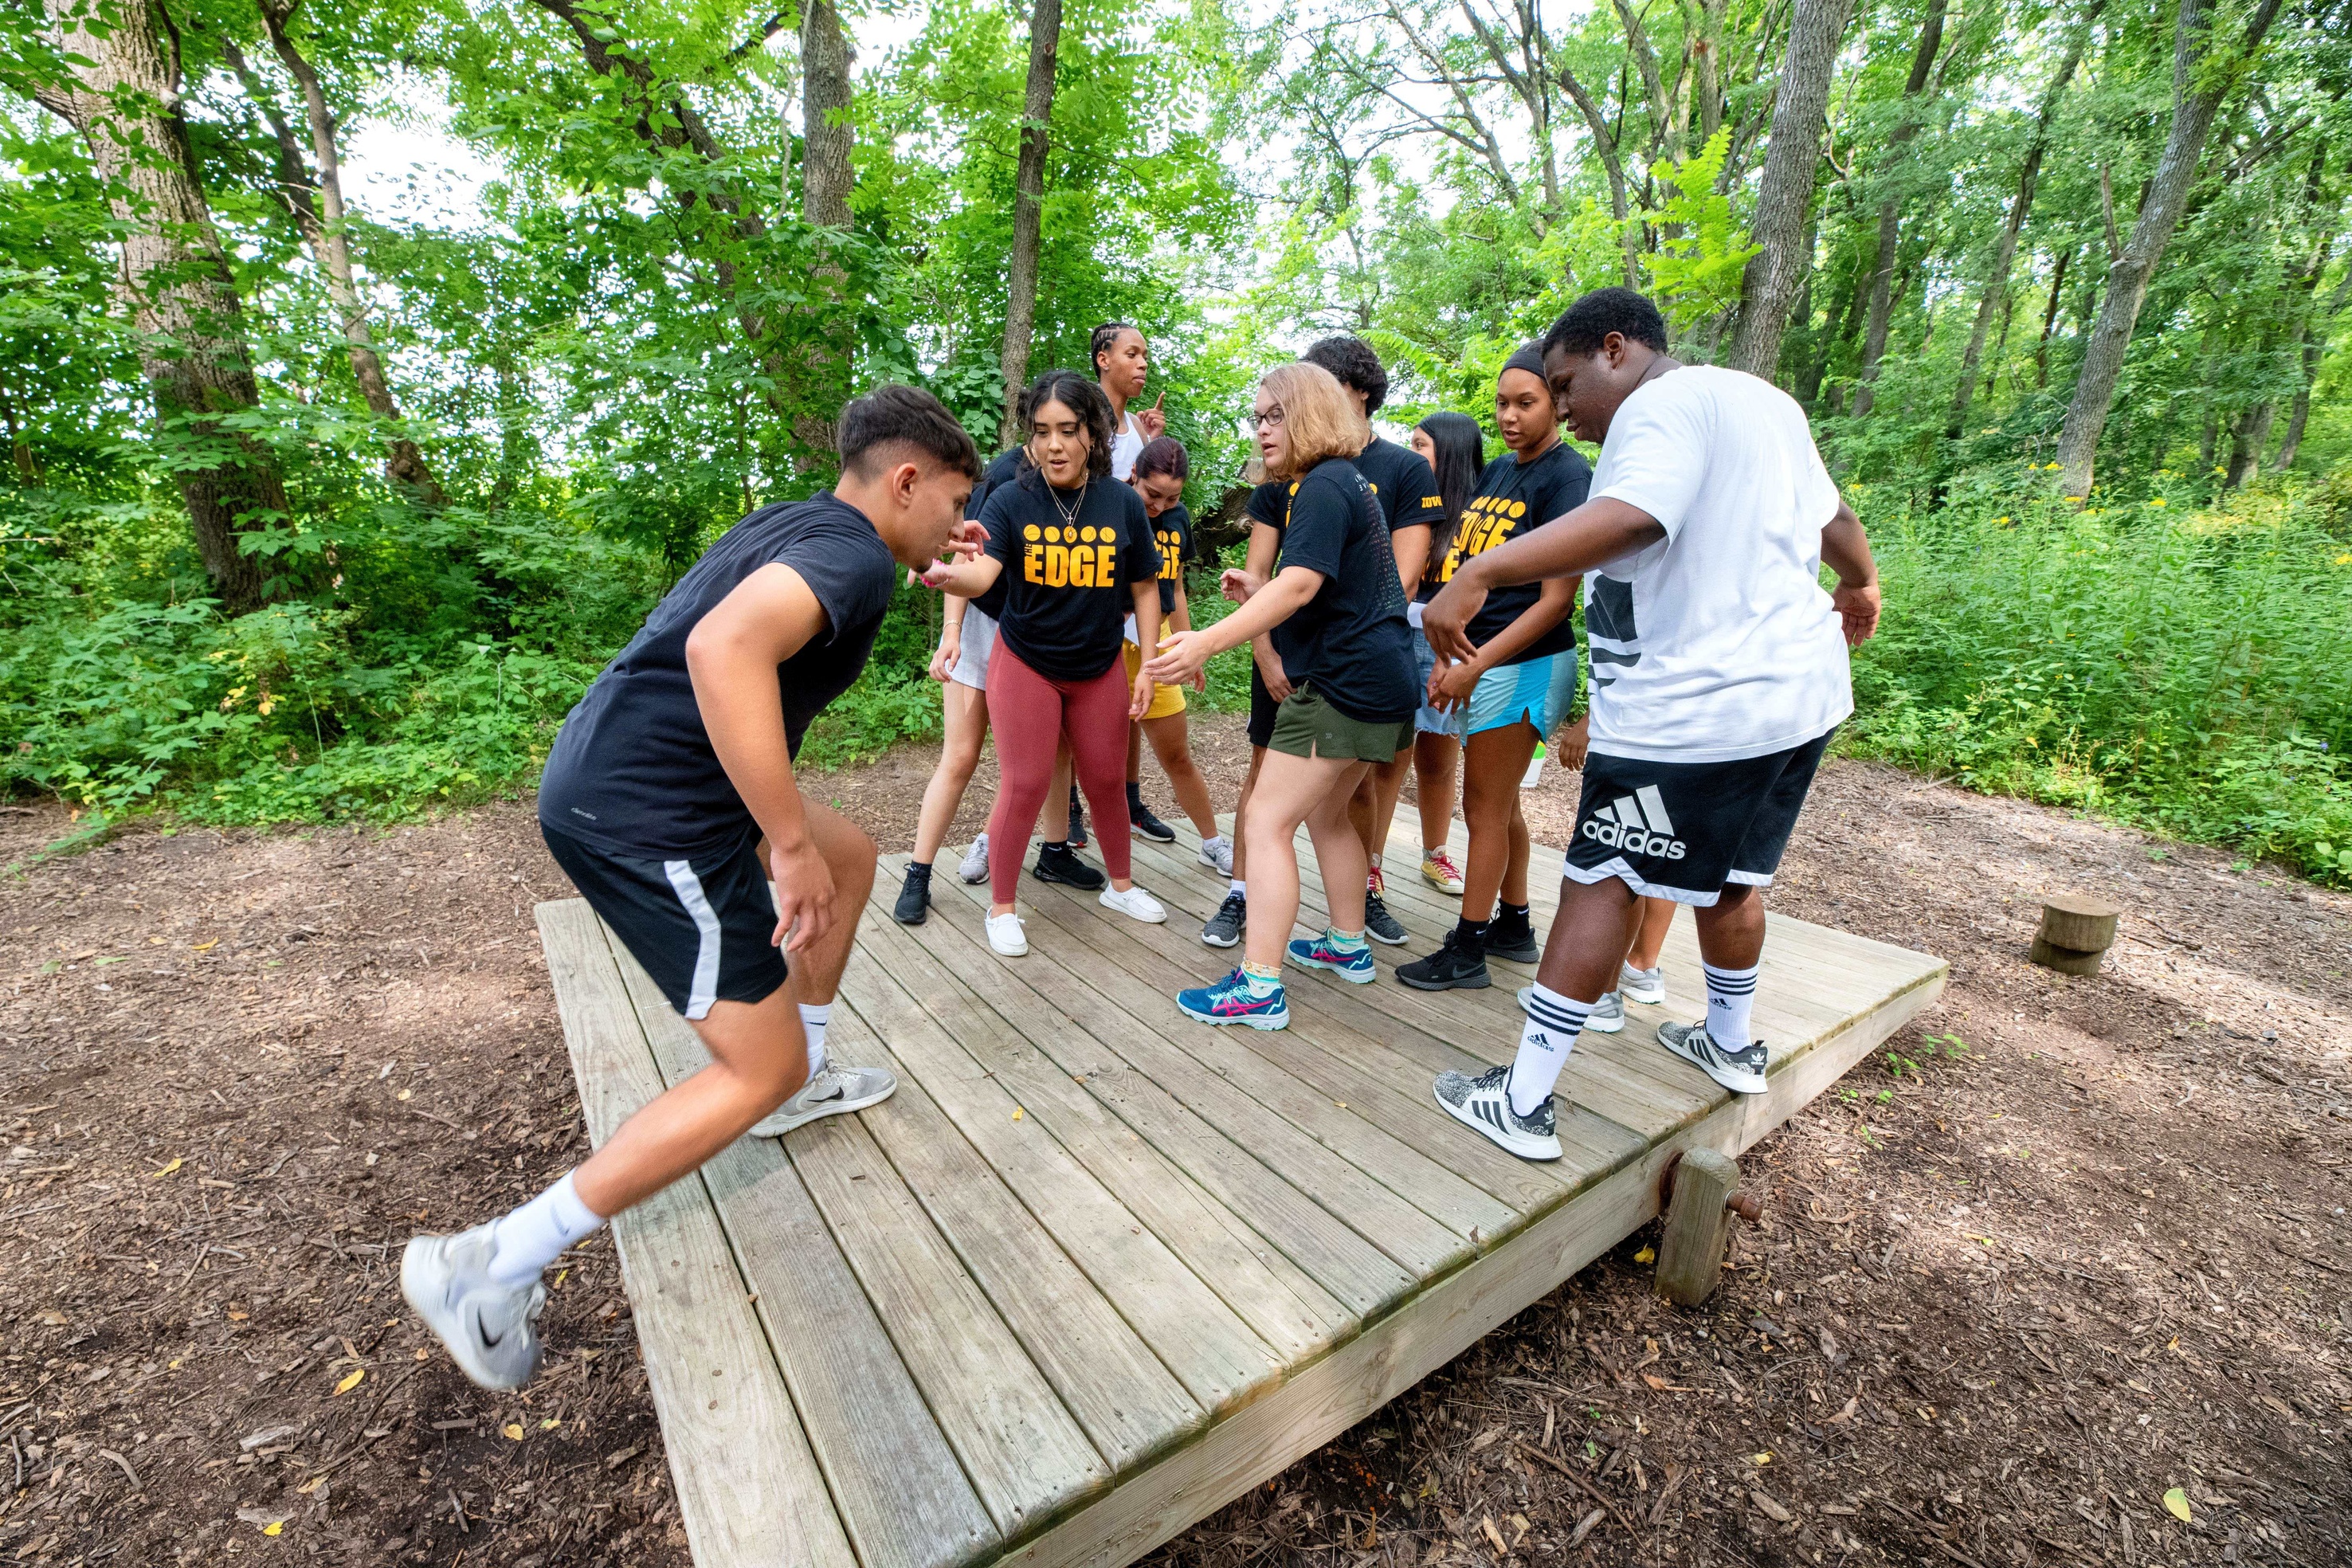 UI Challenge Course  Recreational Services - The University of Iowa